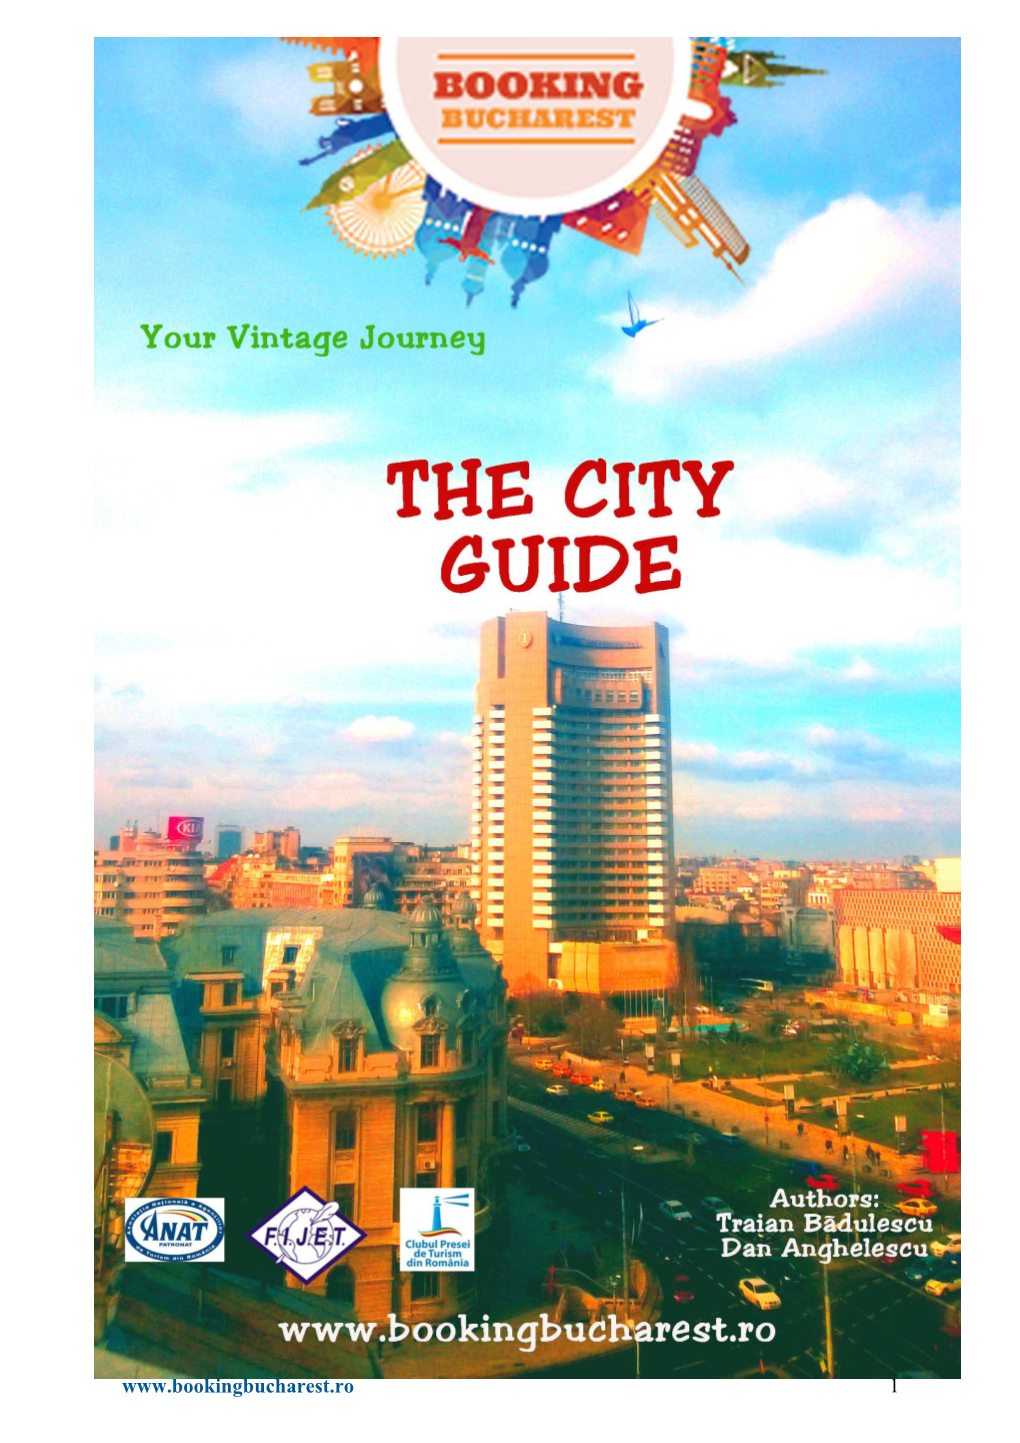 Booking Bucharest the City Guide RO